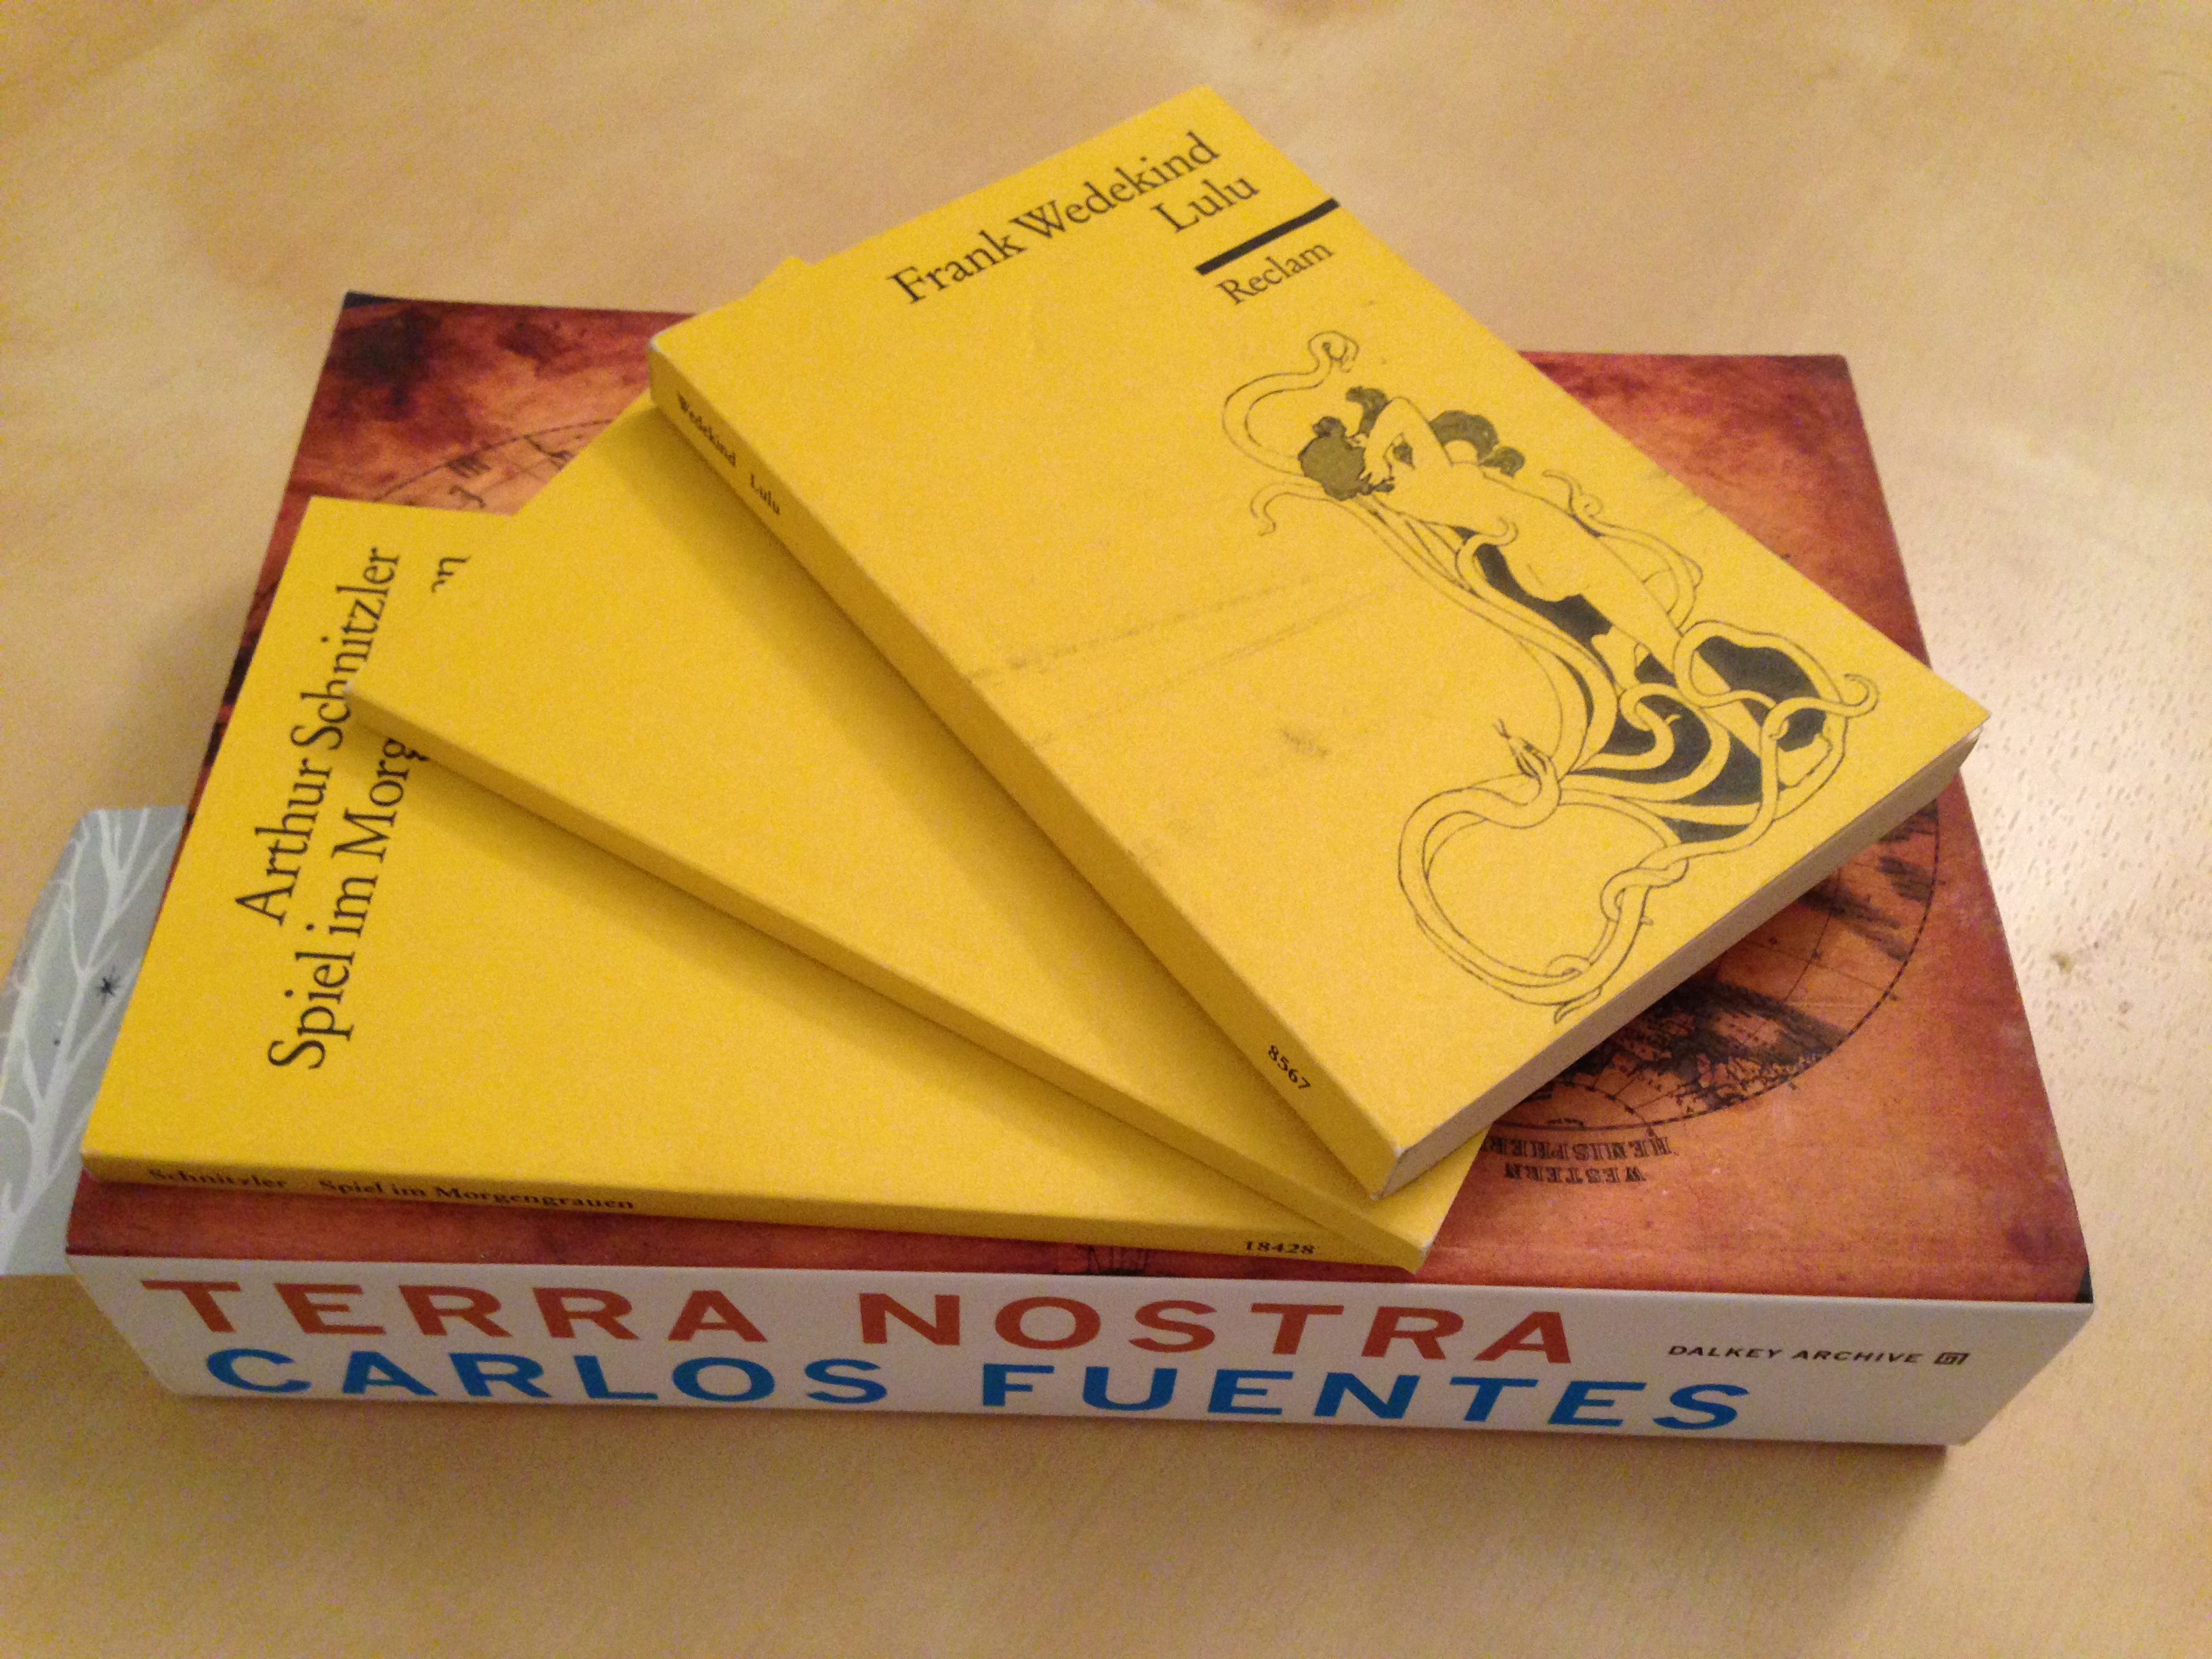 Photo of 3 pocket sized books in German laid out in an arc on top of a large book called Terra Nostra by Carlos Fuentes